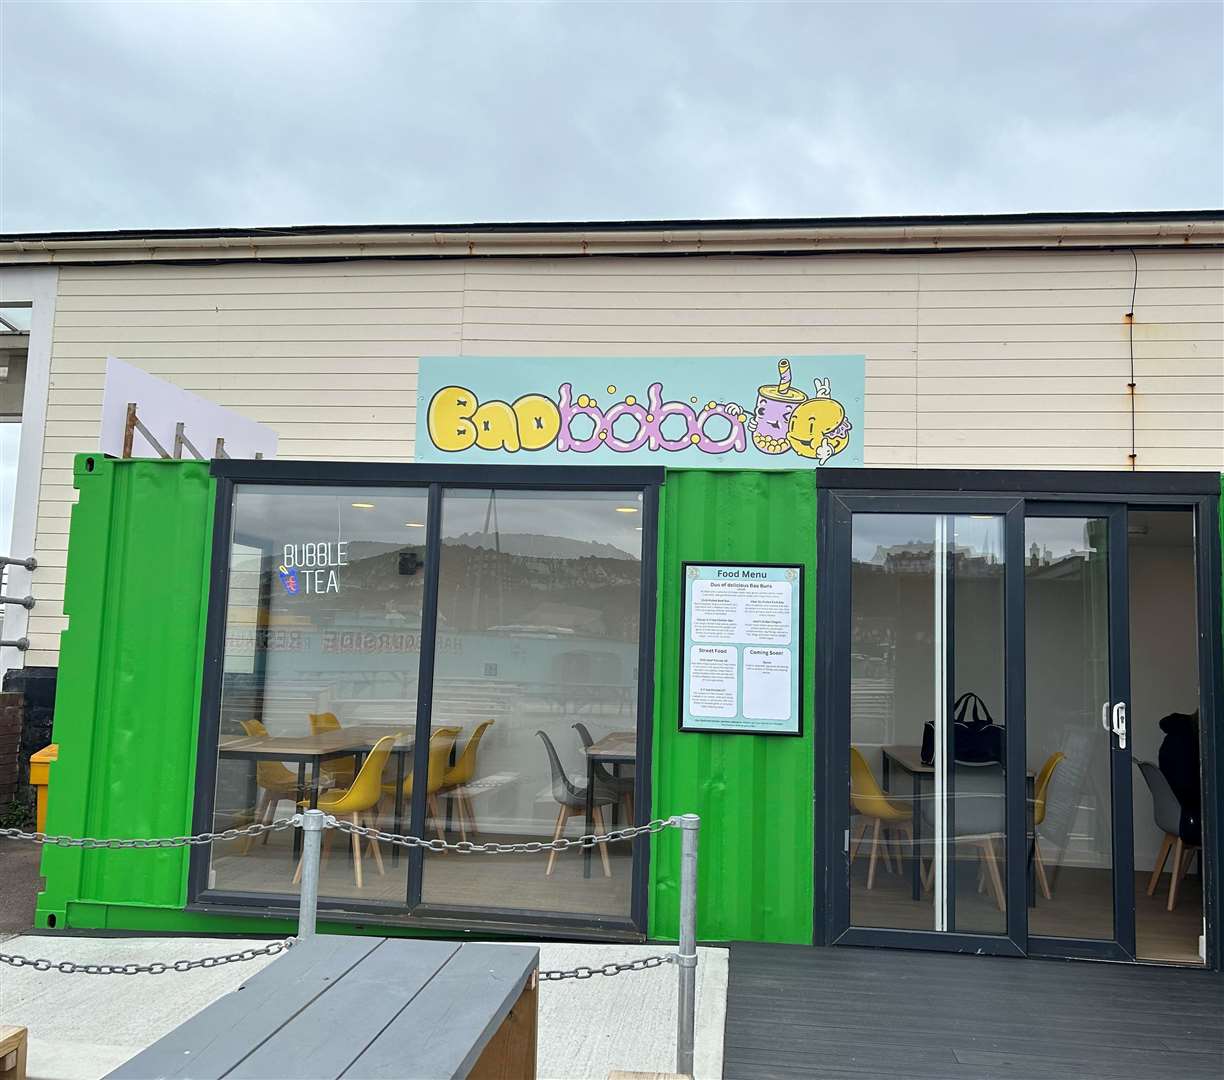 Baoboba opened at Folkestone Harbour Arm in August